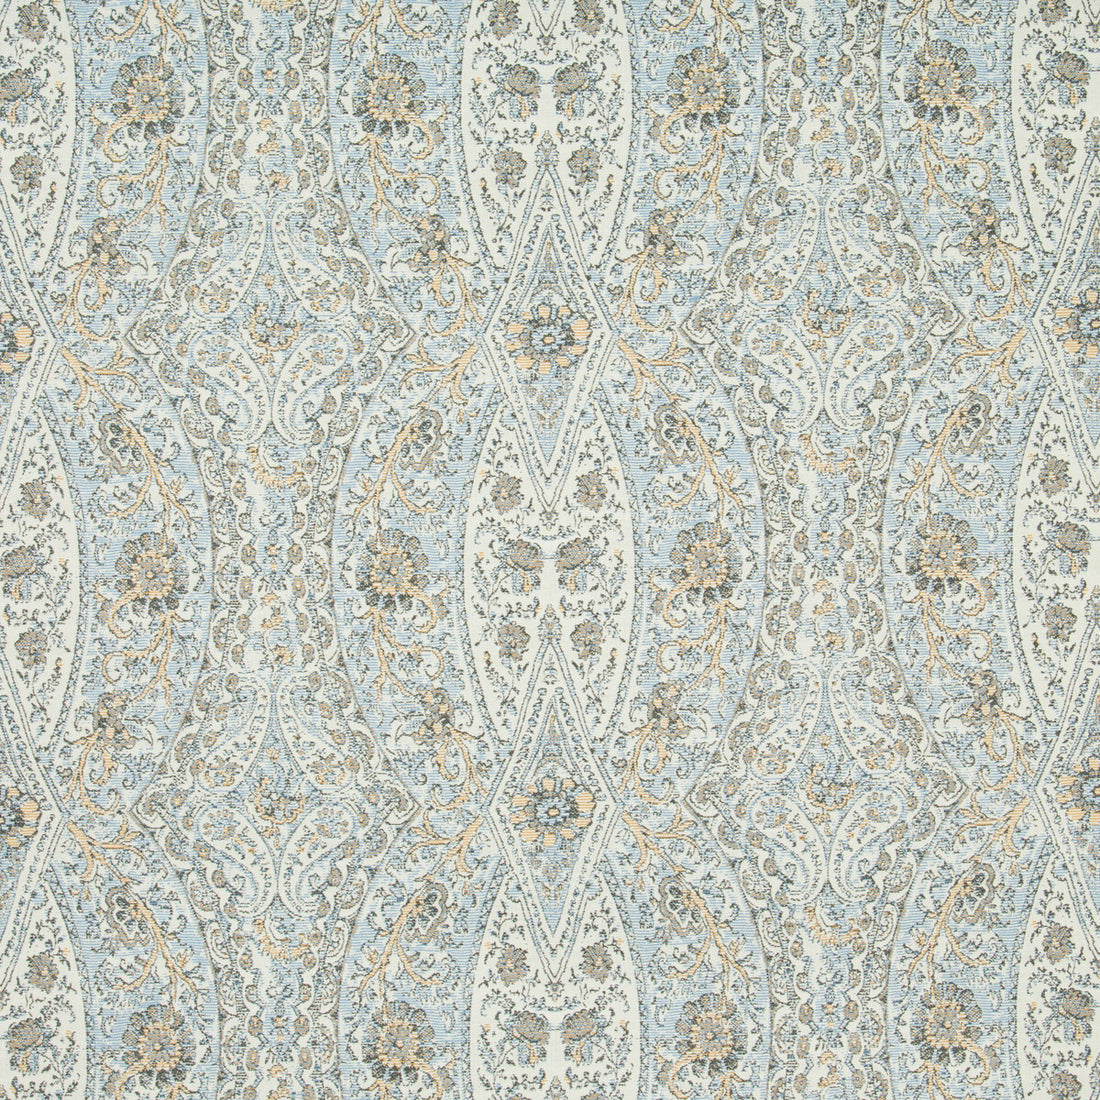 Kravet Contract fabric in 34760-54 color - pattern 34760.54.0 - by Kravet Contract in the Crypton Incase collection